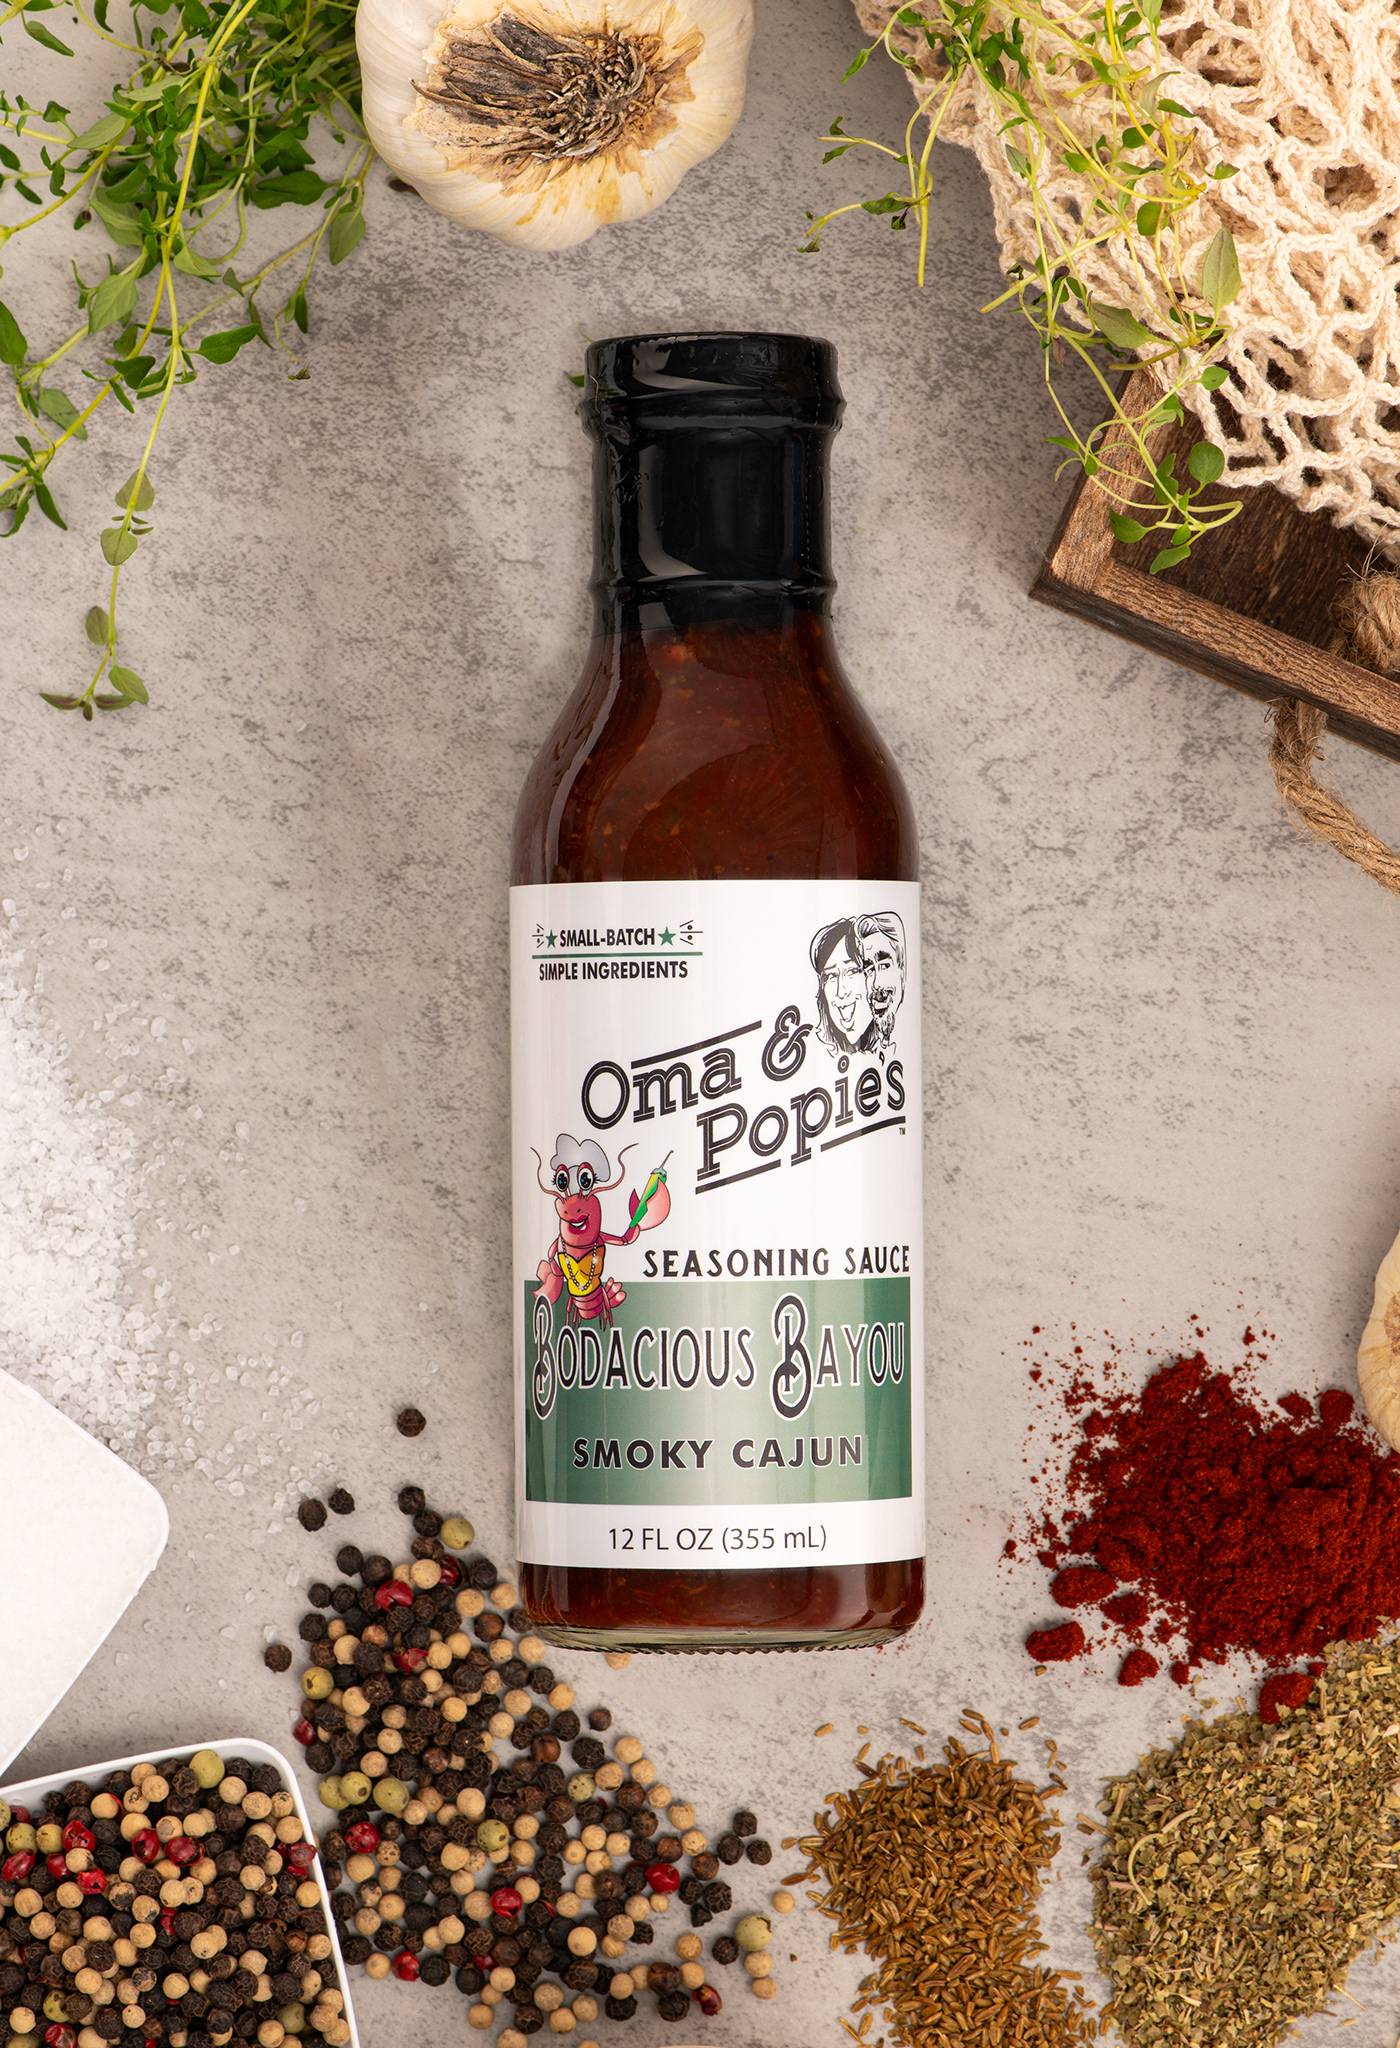 Product Photography boise Idaho Food  foodphotography sauces spices styled food peppers onions